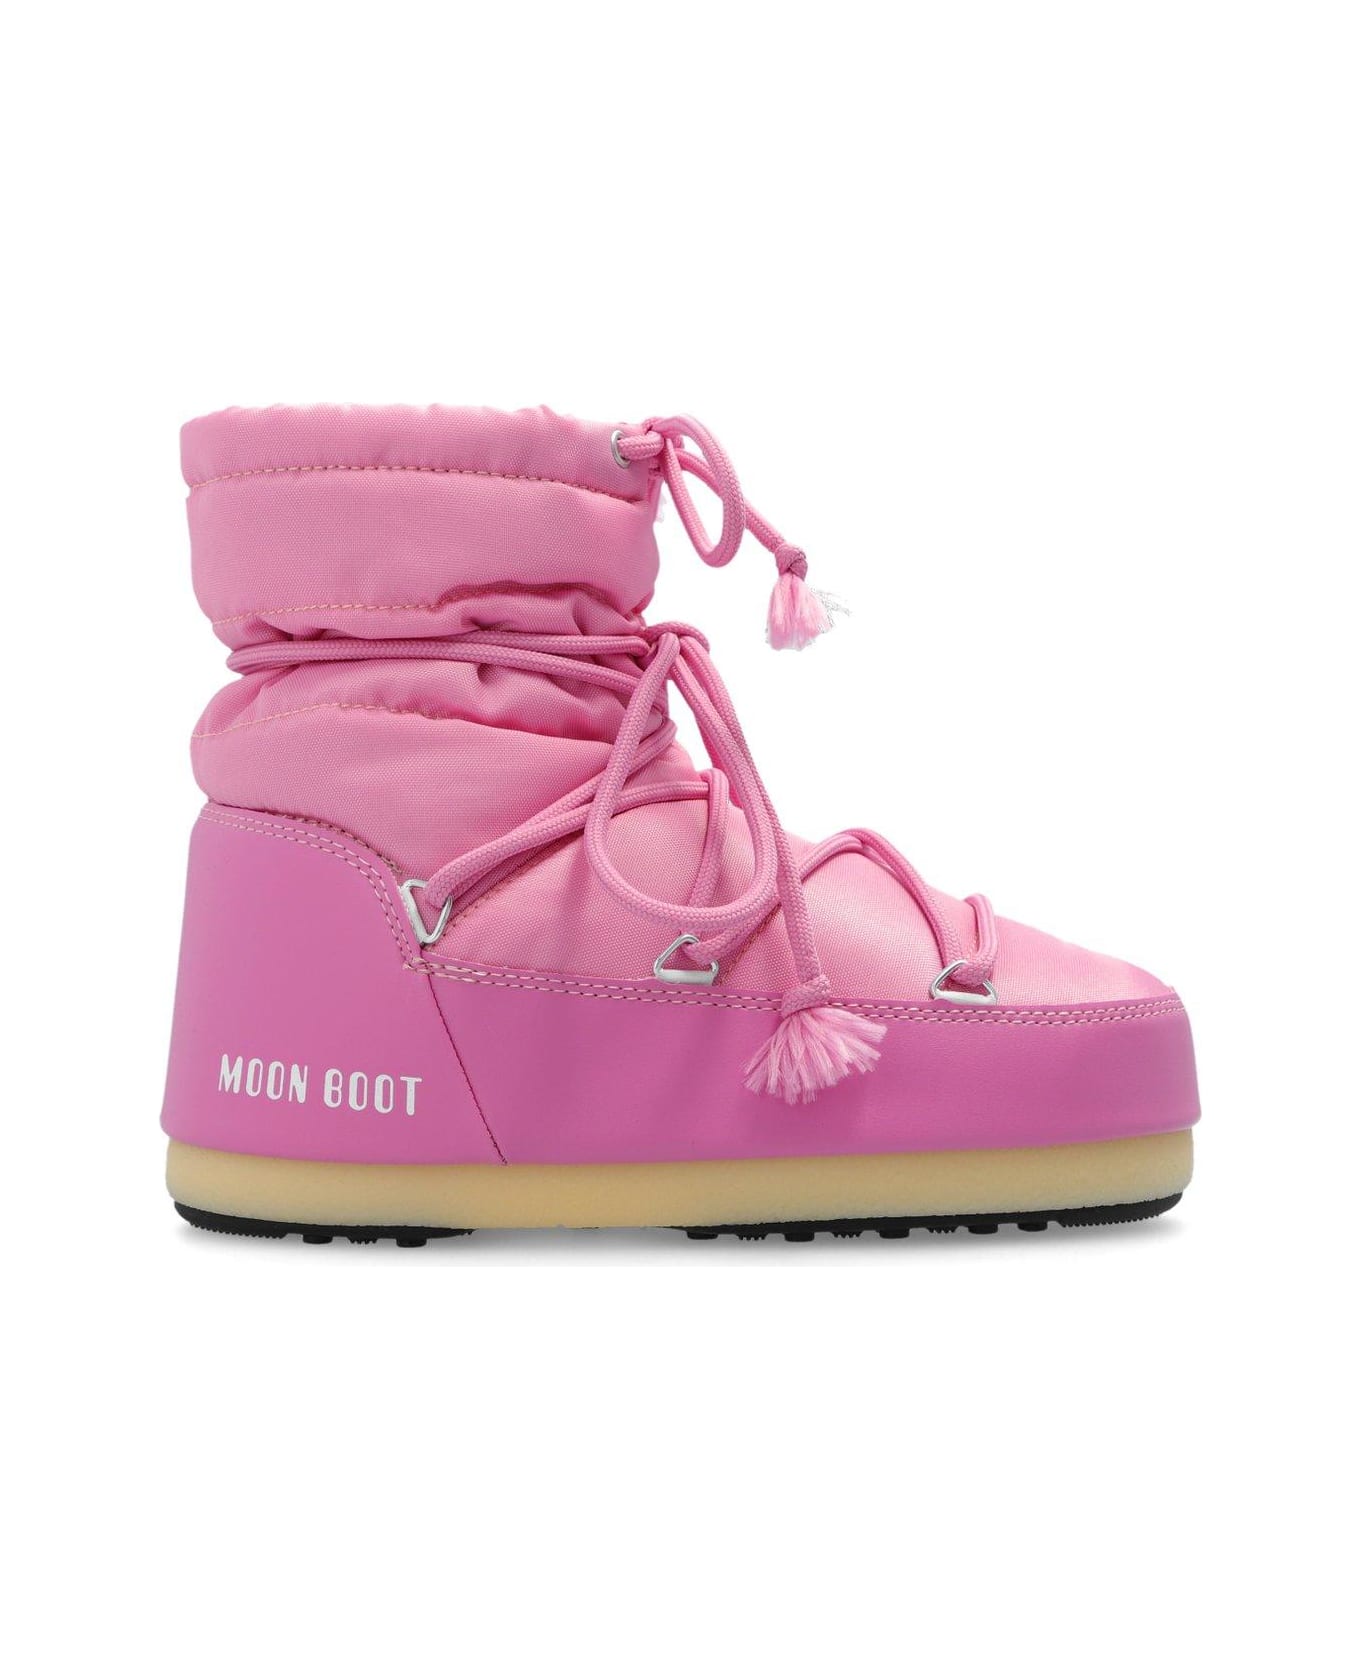 Moon Boot Light Low Lace-up Snow Boots - PINK